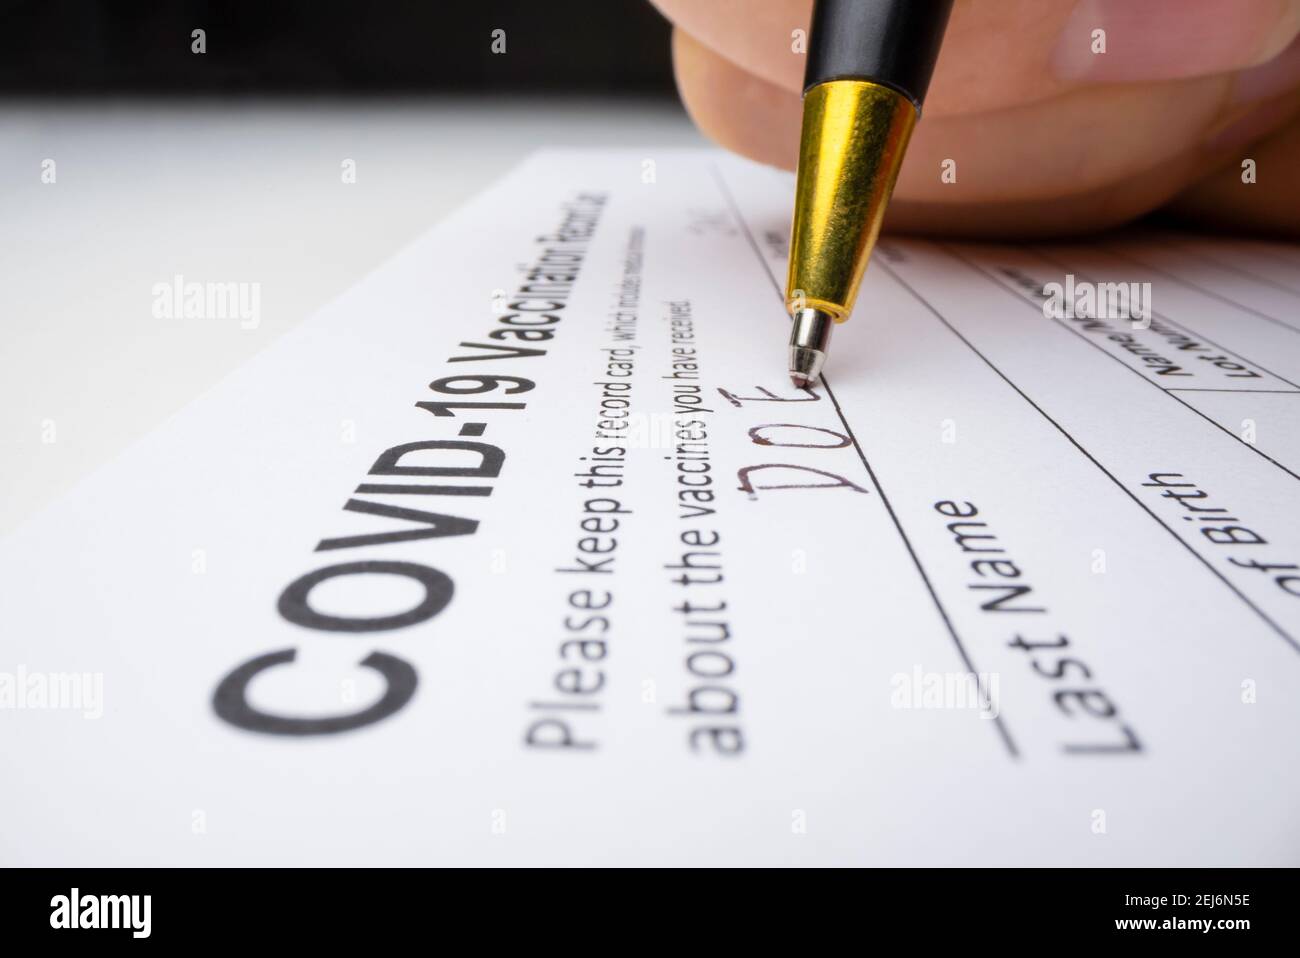 Close-up view of issuing Covid-19 vaccination record card Stock Photo